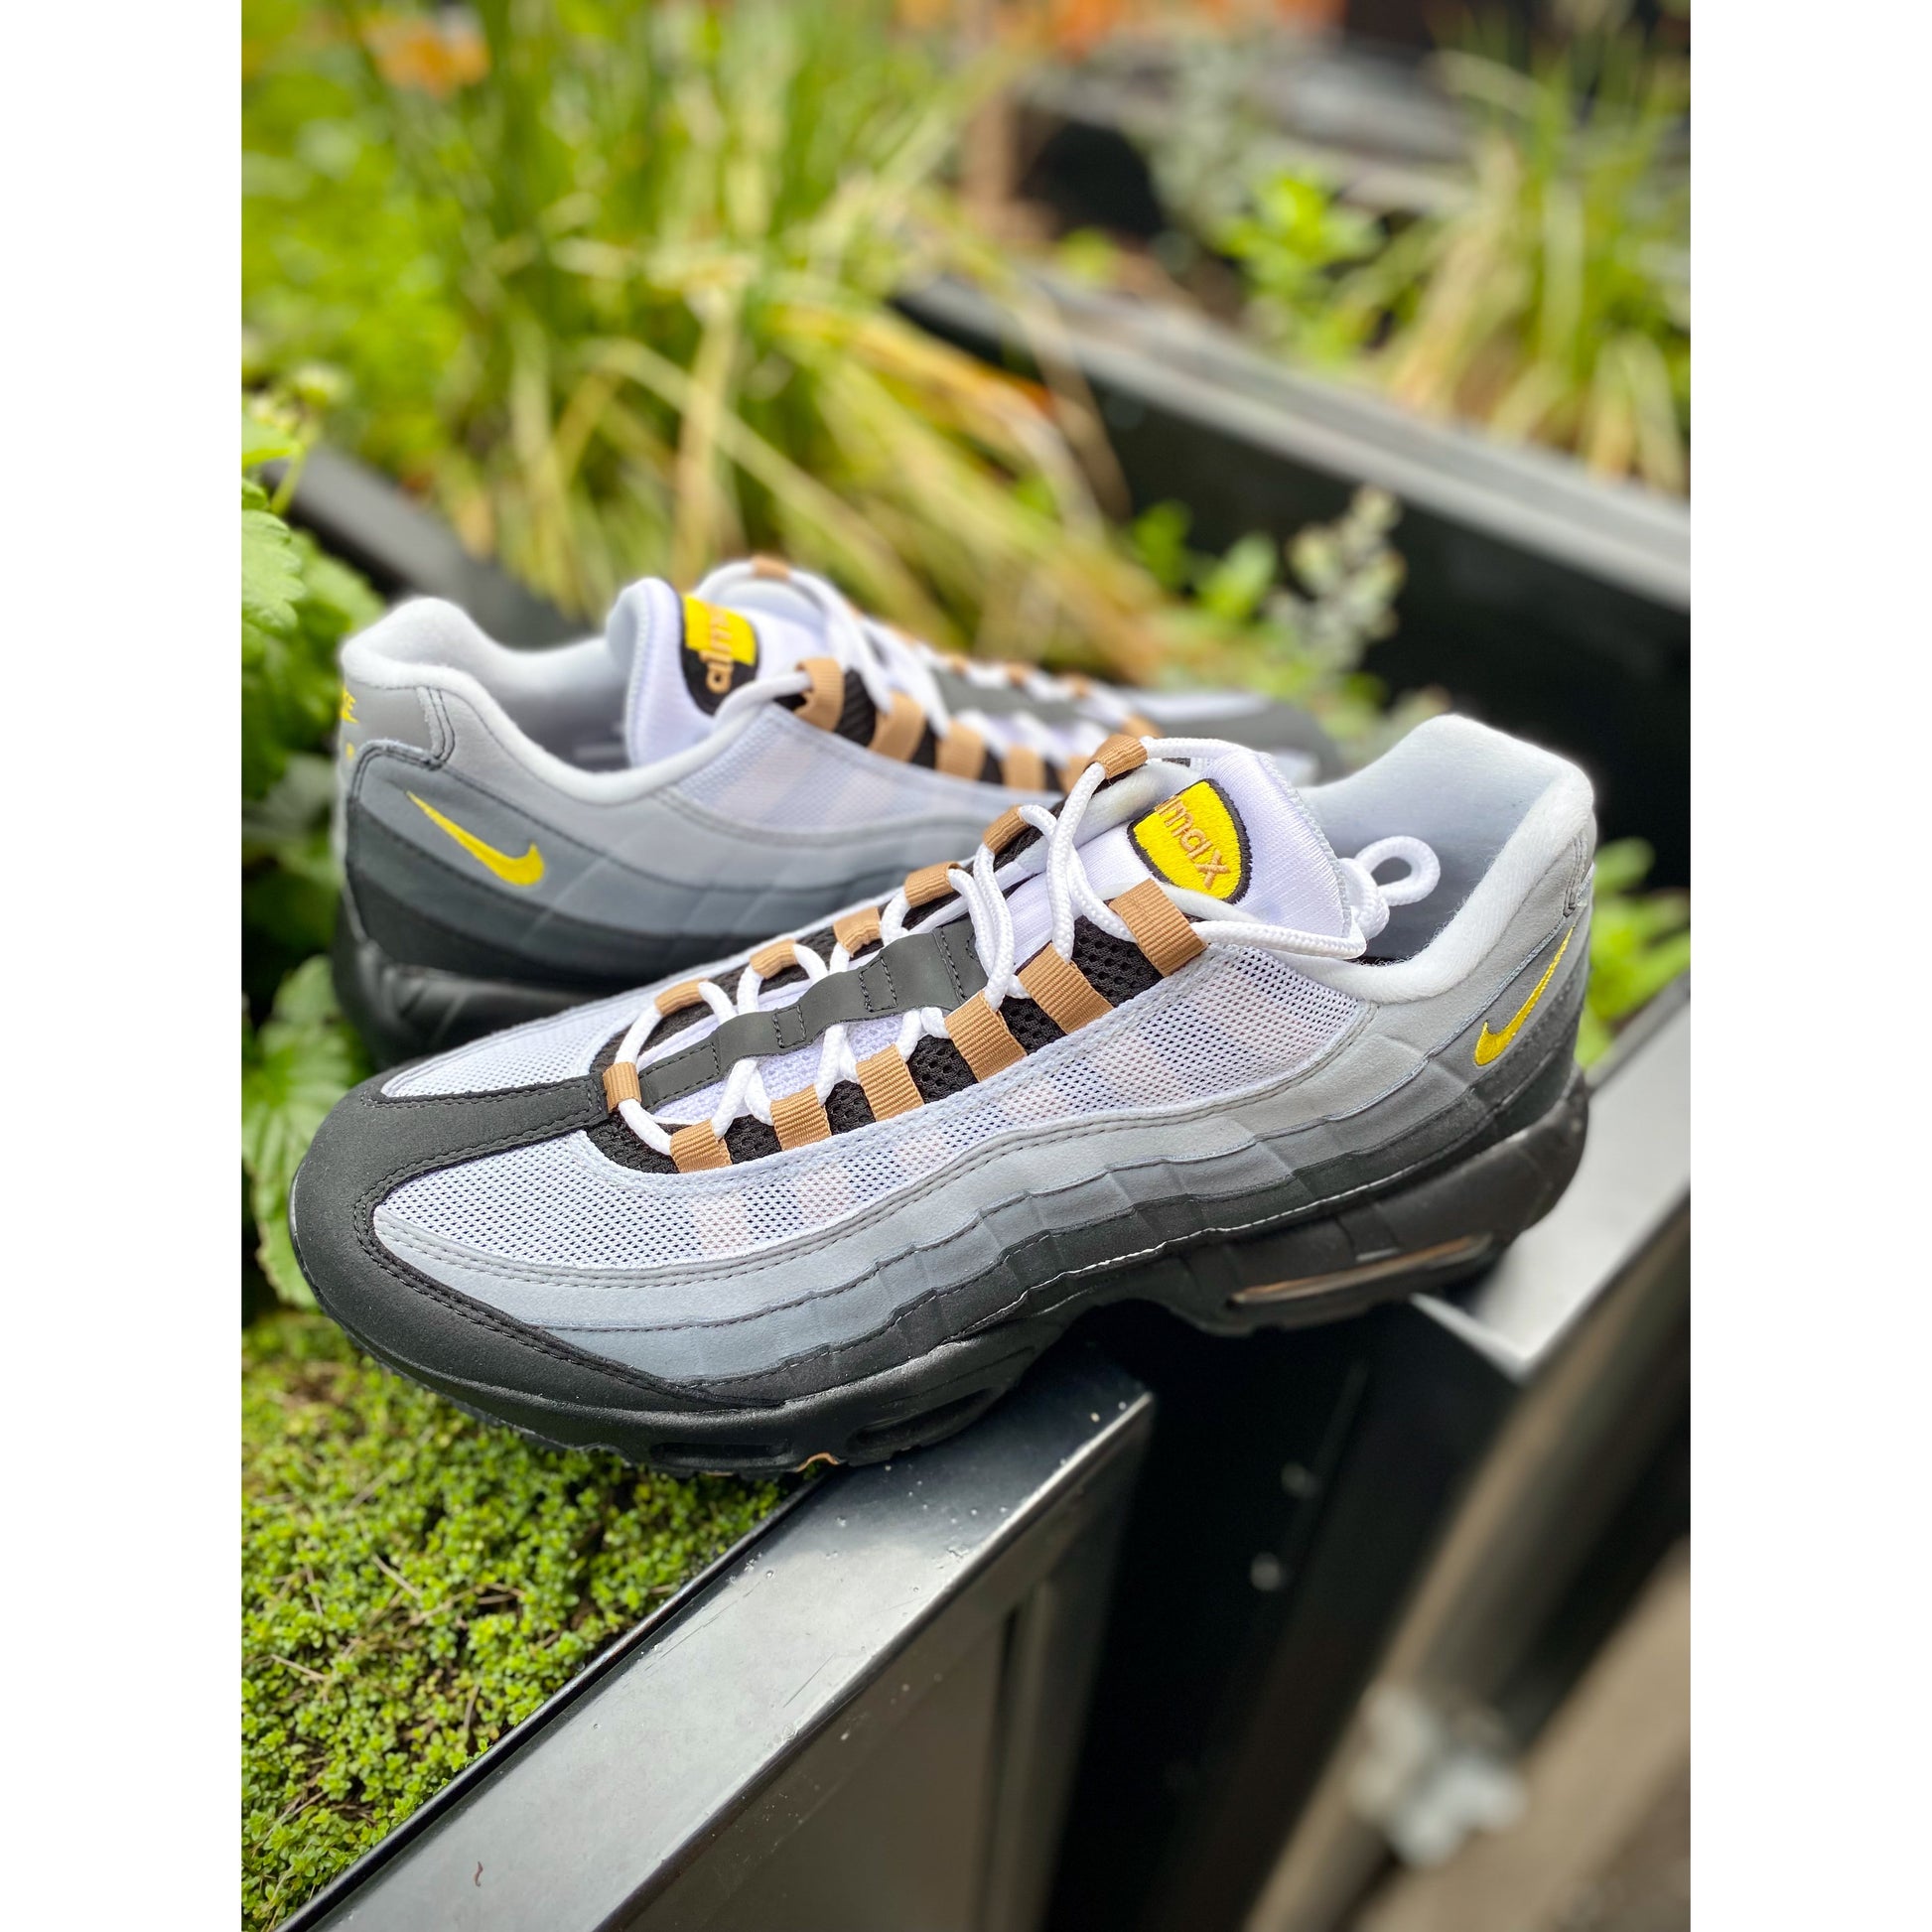 NIKE AIR MAX 95 OG YELLOW STRIKE by Nike from £168.00